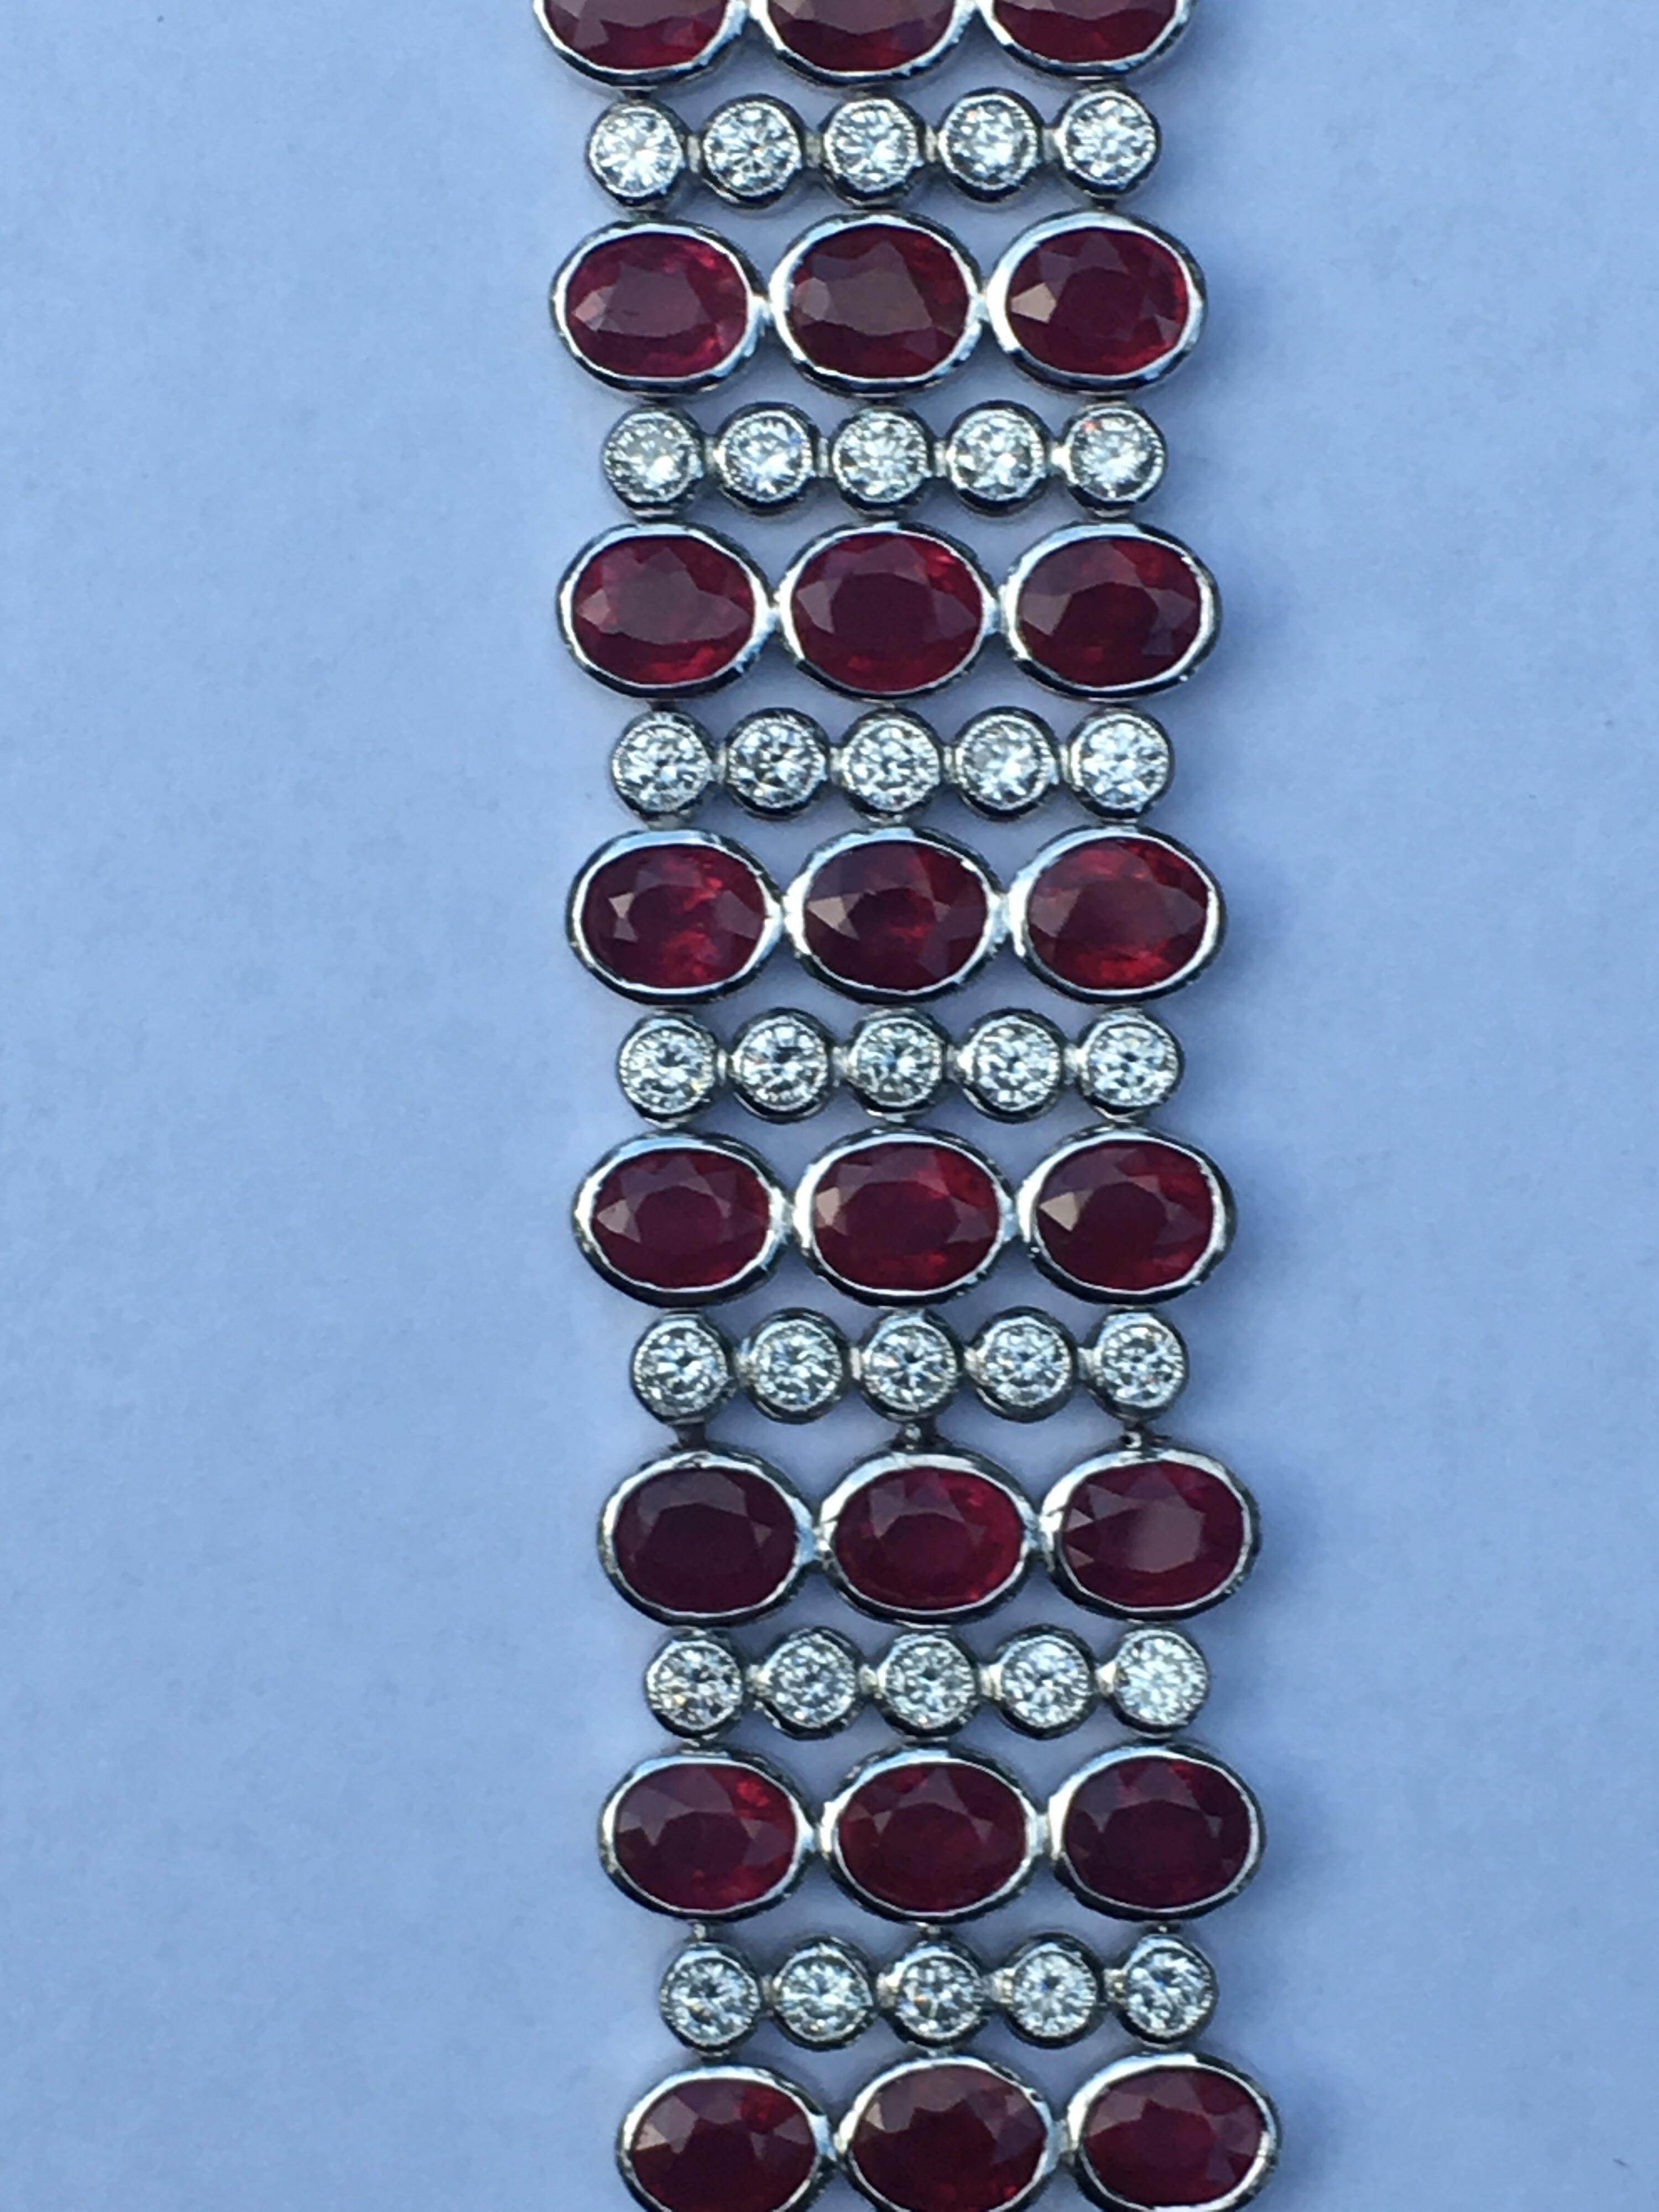 Natural Ruby and diamonds Set in 18K White gold.Total Weight of Ruby is 31.90 Carat and Total weight of Diamond is 5.12 Carat.The Bracelet is one of a kind hand crafted,